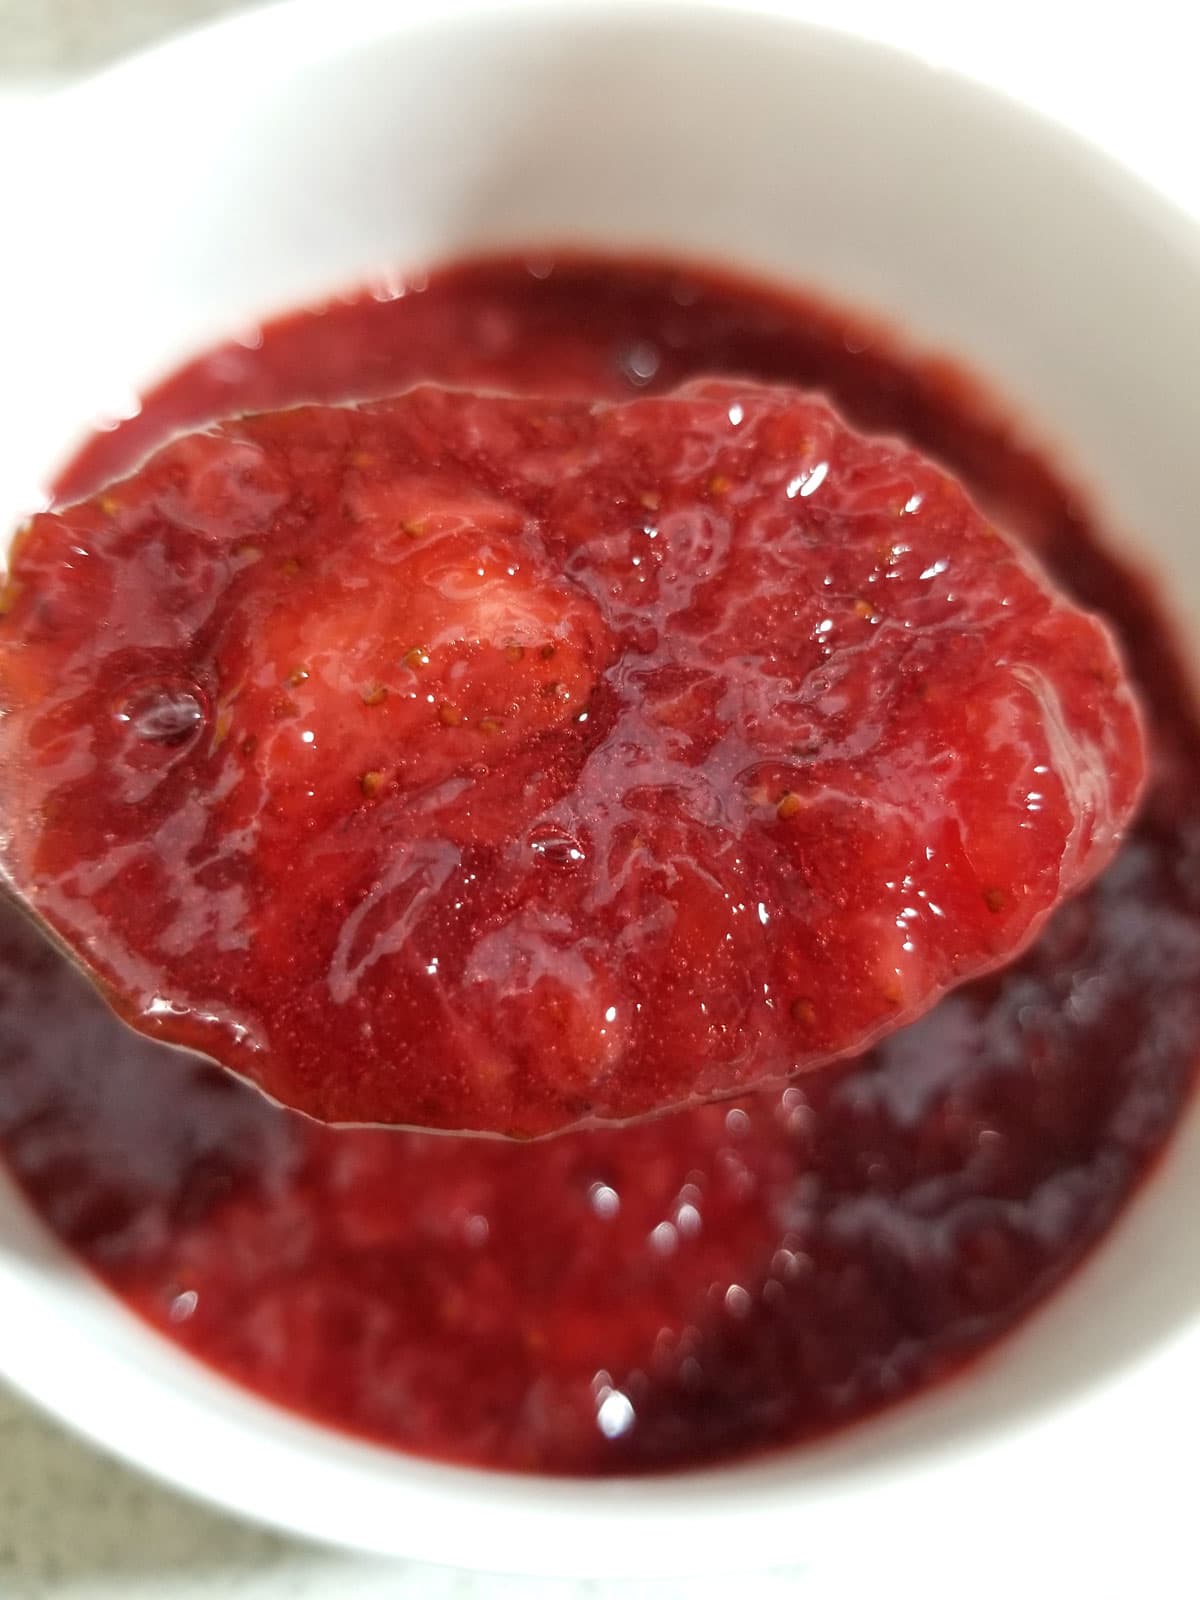 strawberry sauce for cheesecakes, pancakes, waffles, ice creams